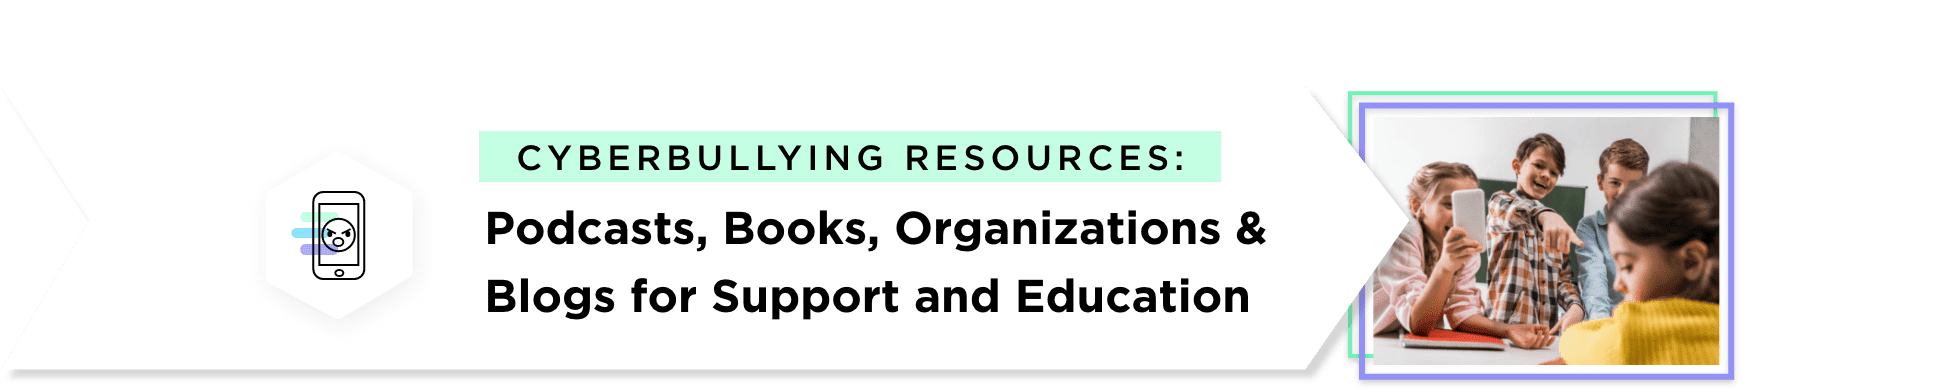 Cyberbullying Resources: Podcasts, Books, Organizations and Blogs for Support and Education